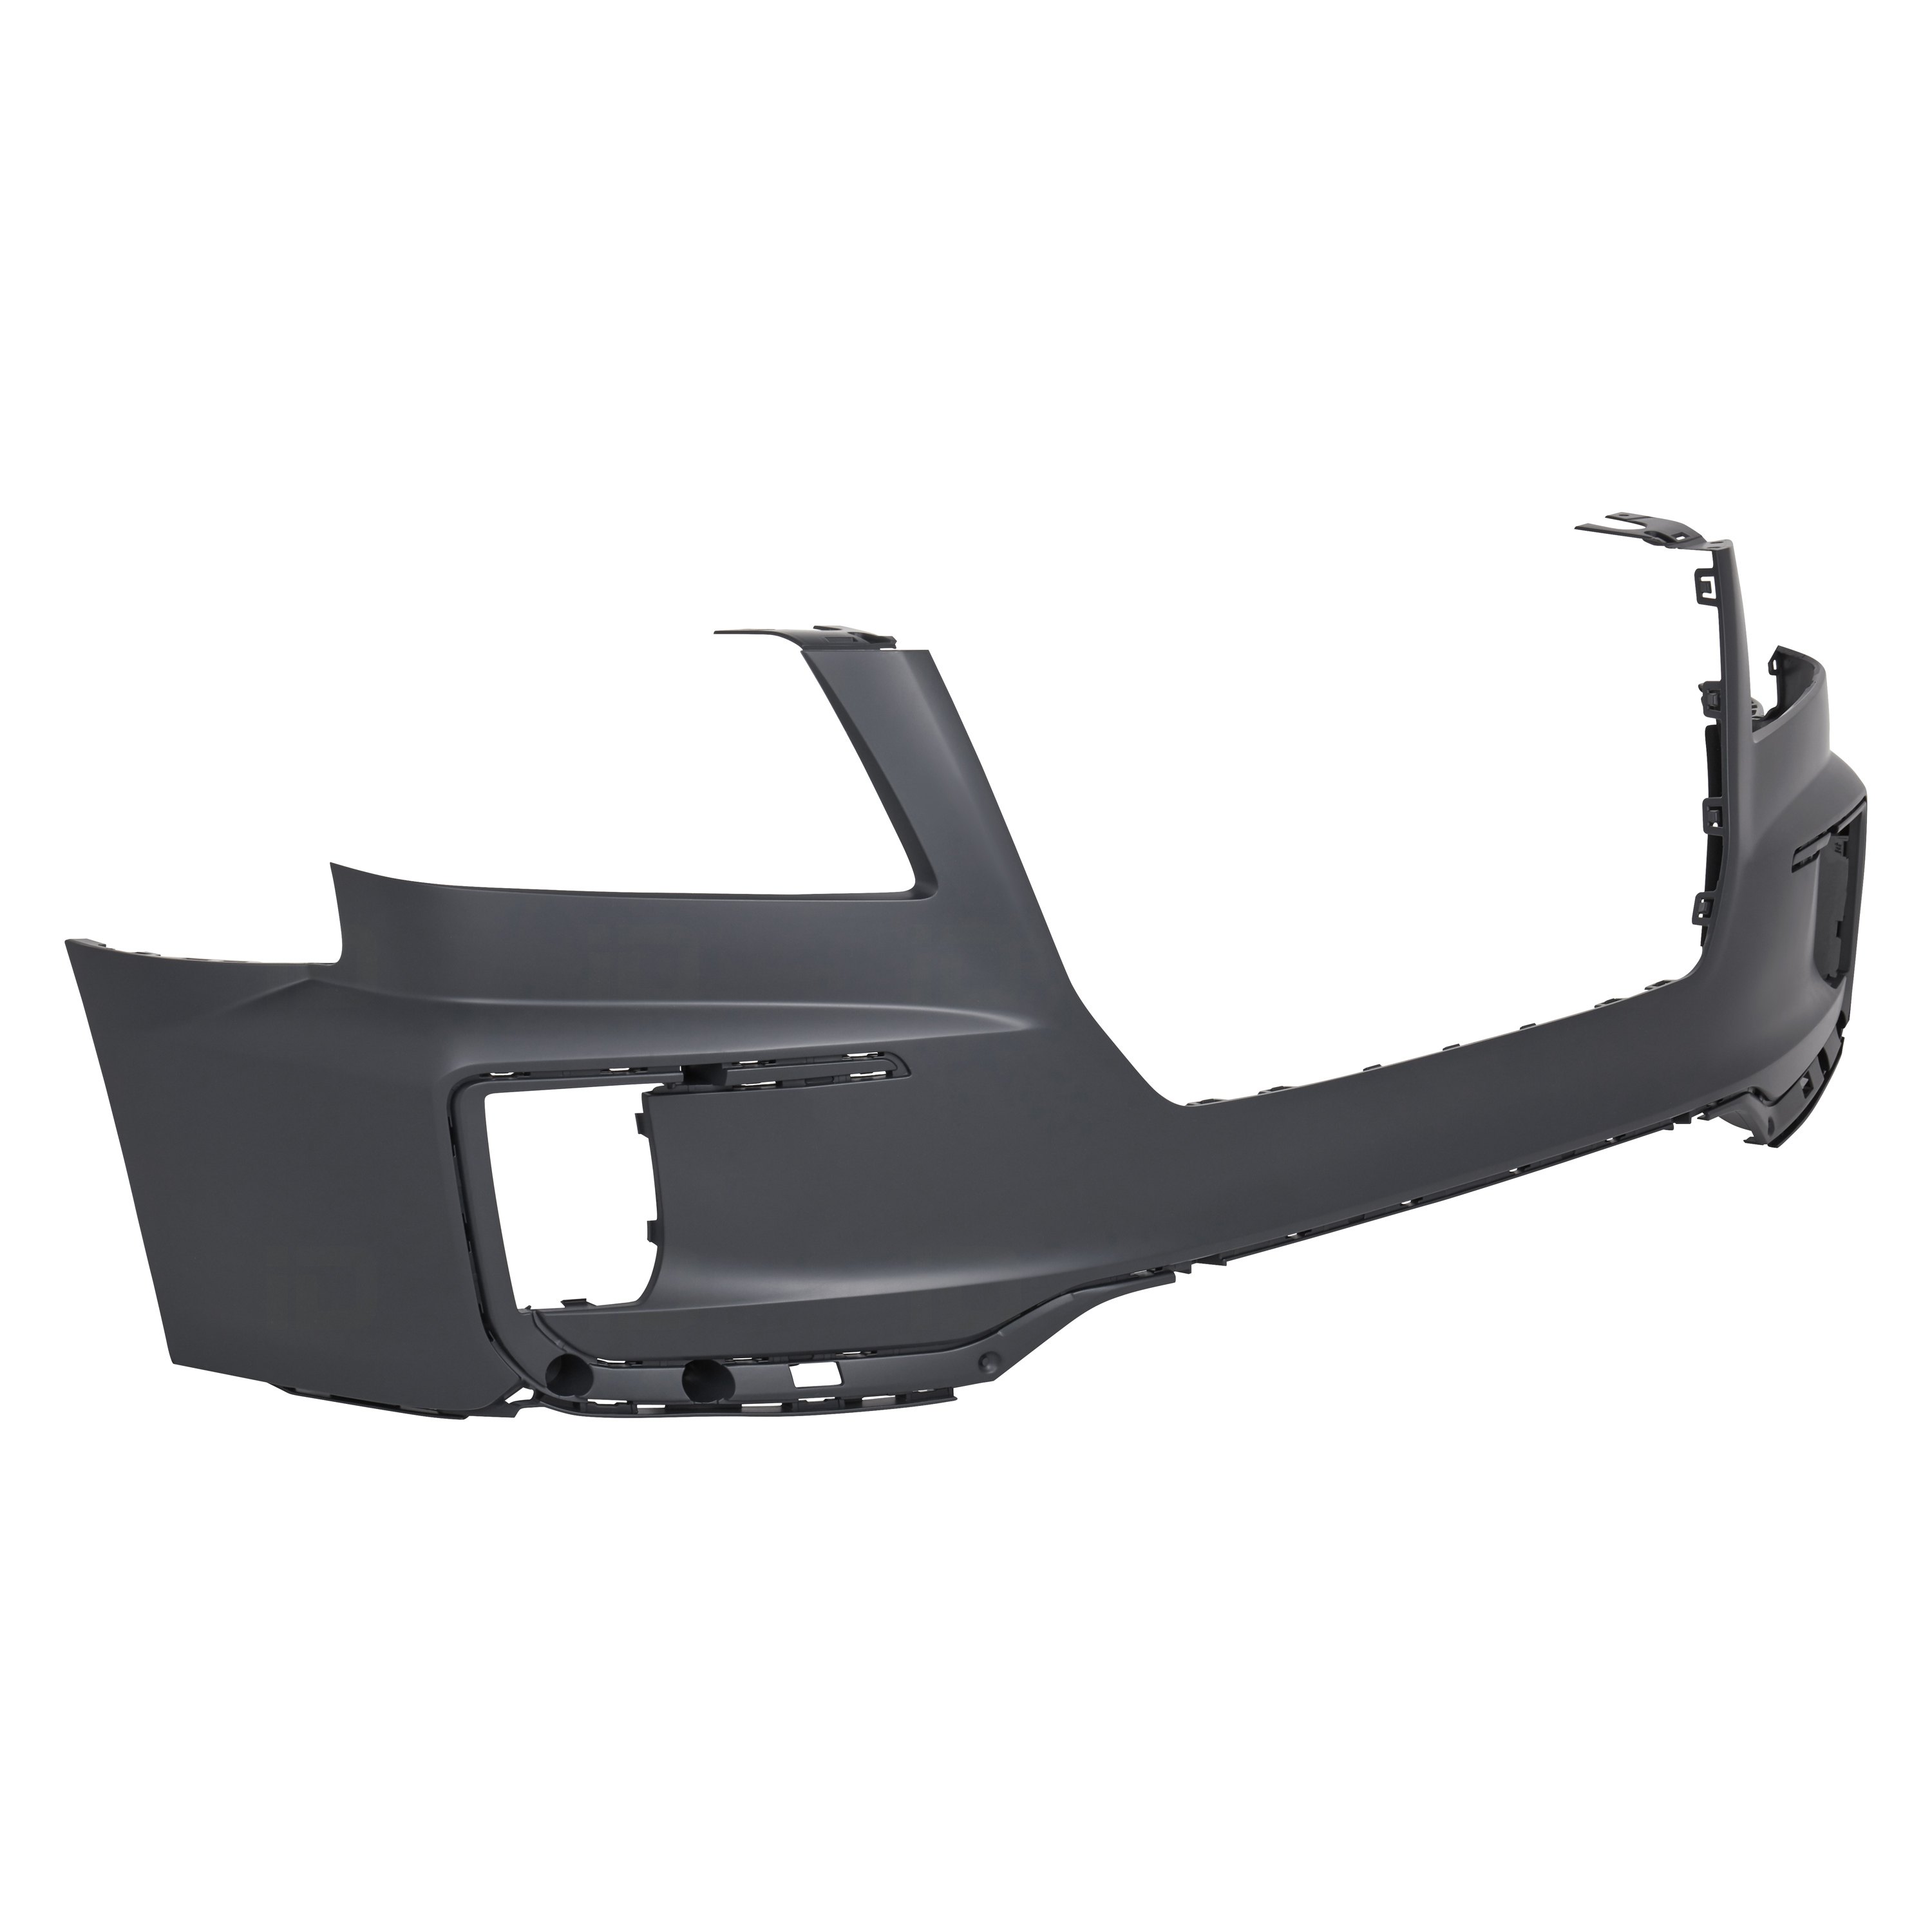 Replace® Gm1014122 Front Upper Bumper Cover Standard Line 2118